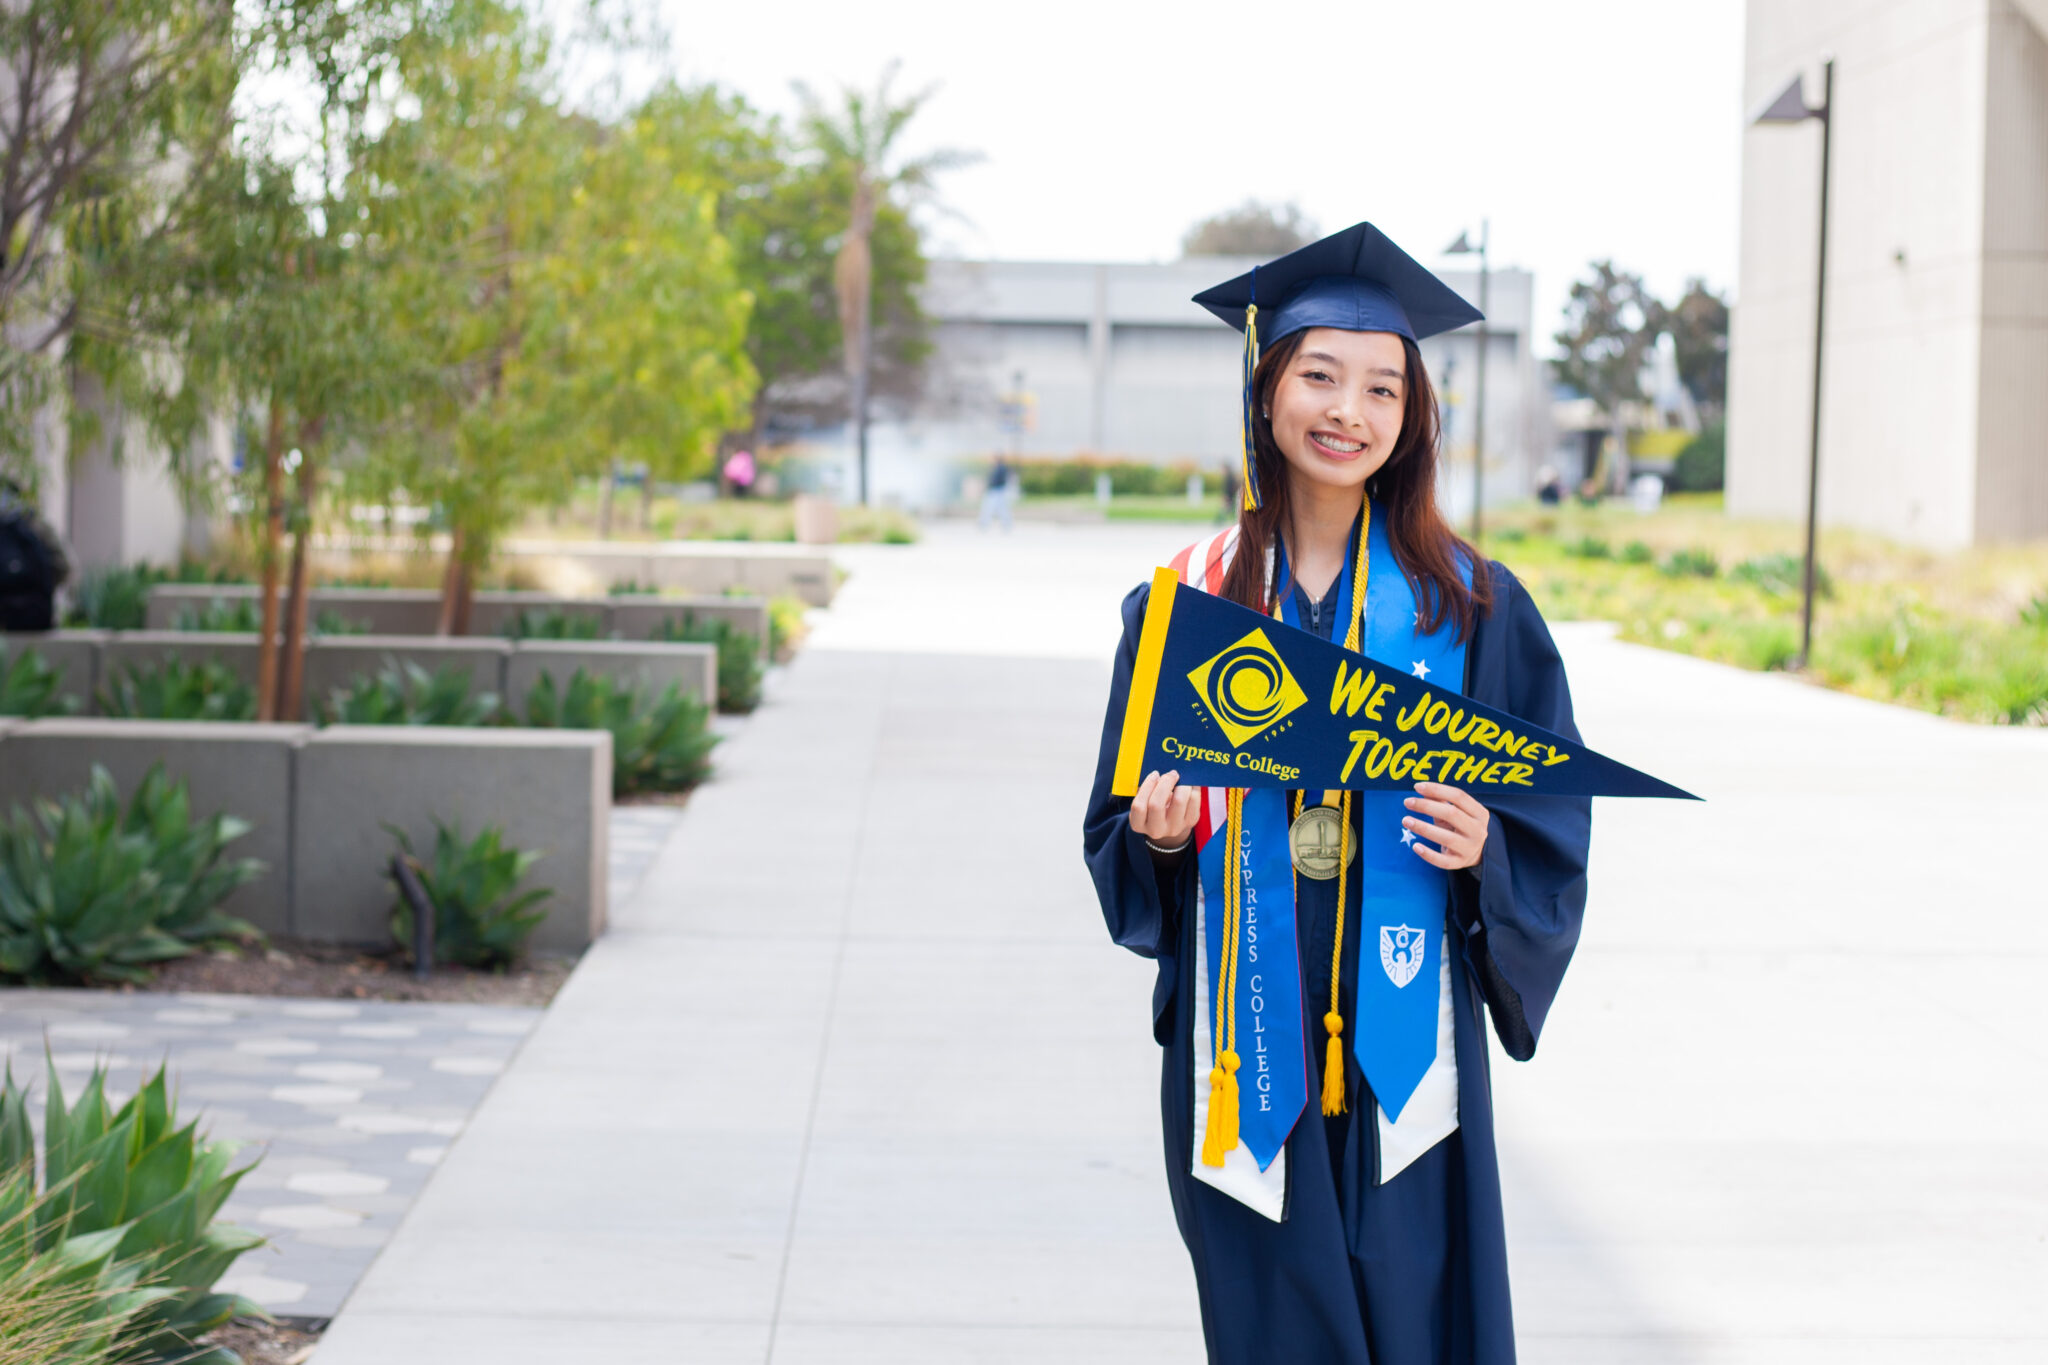 Portrait of Mia Nguyen, the 2023 Presidential Scholar of Distinction for the Science, Engineering, Mathematics pathway, wearing regalia and holding a Cypress College "We Journey Together" pennant with the pond in the background.